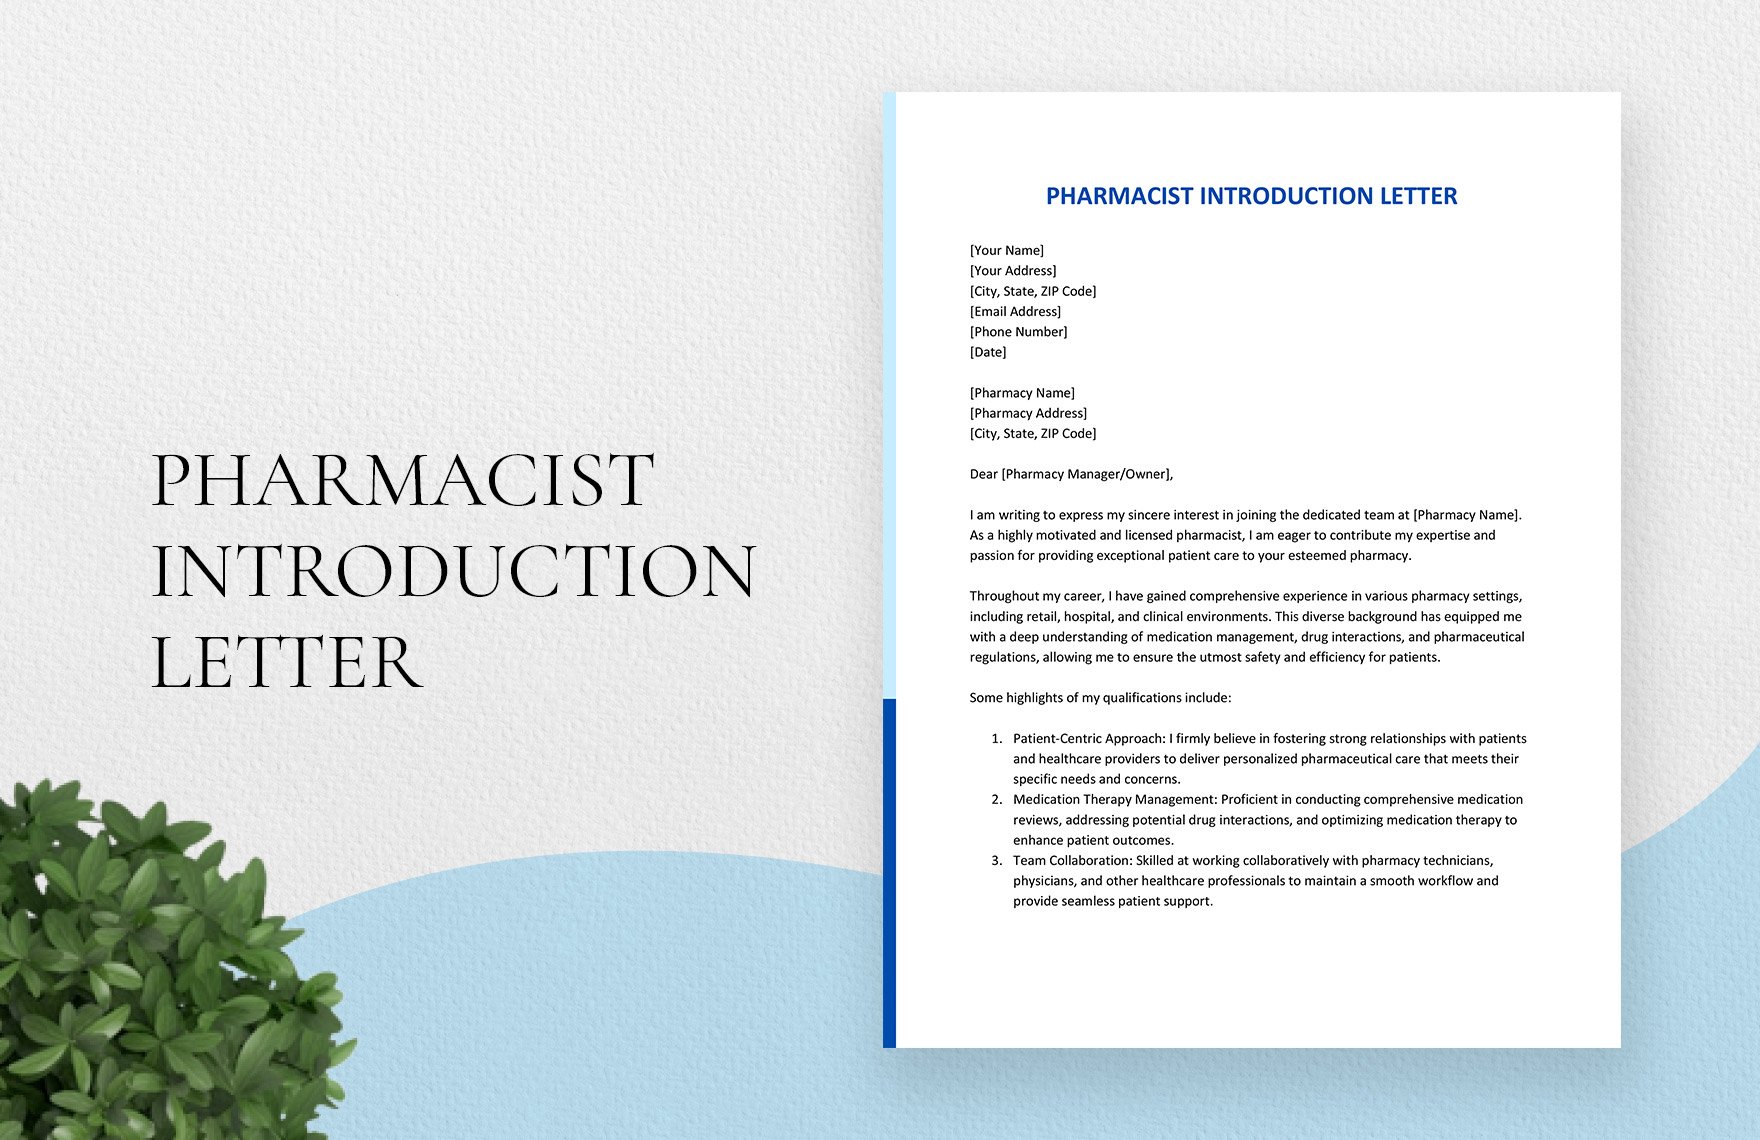 Pharmacist Introduction Letter